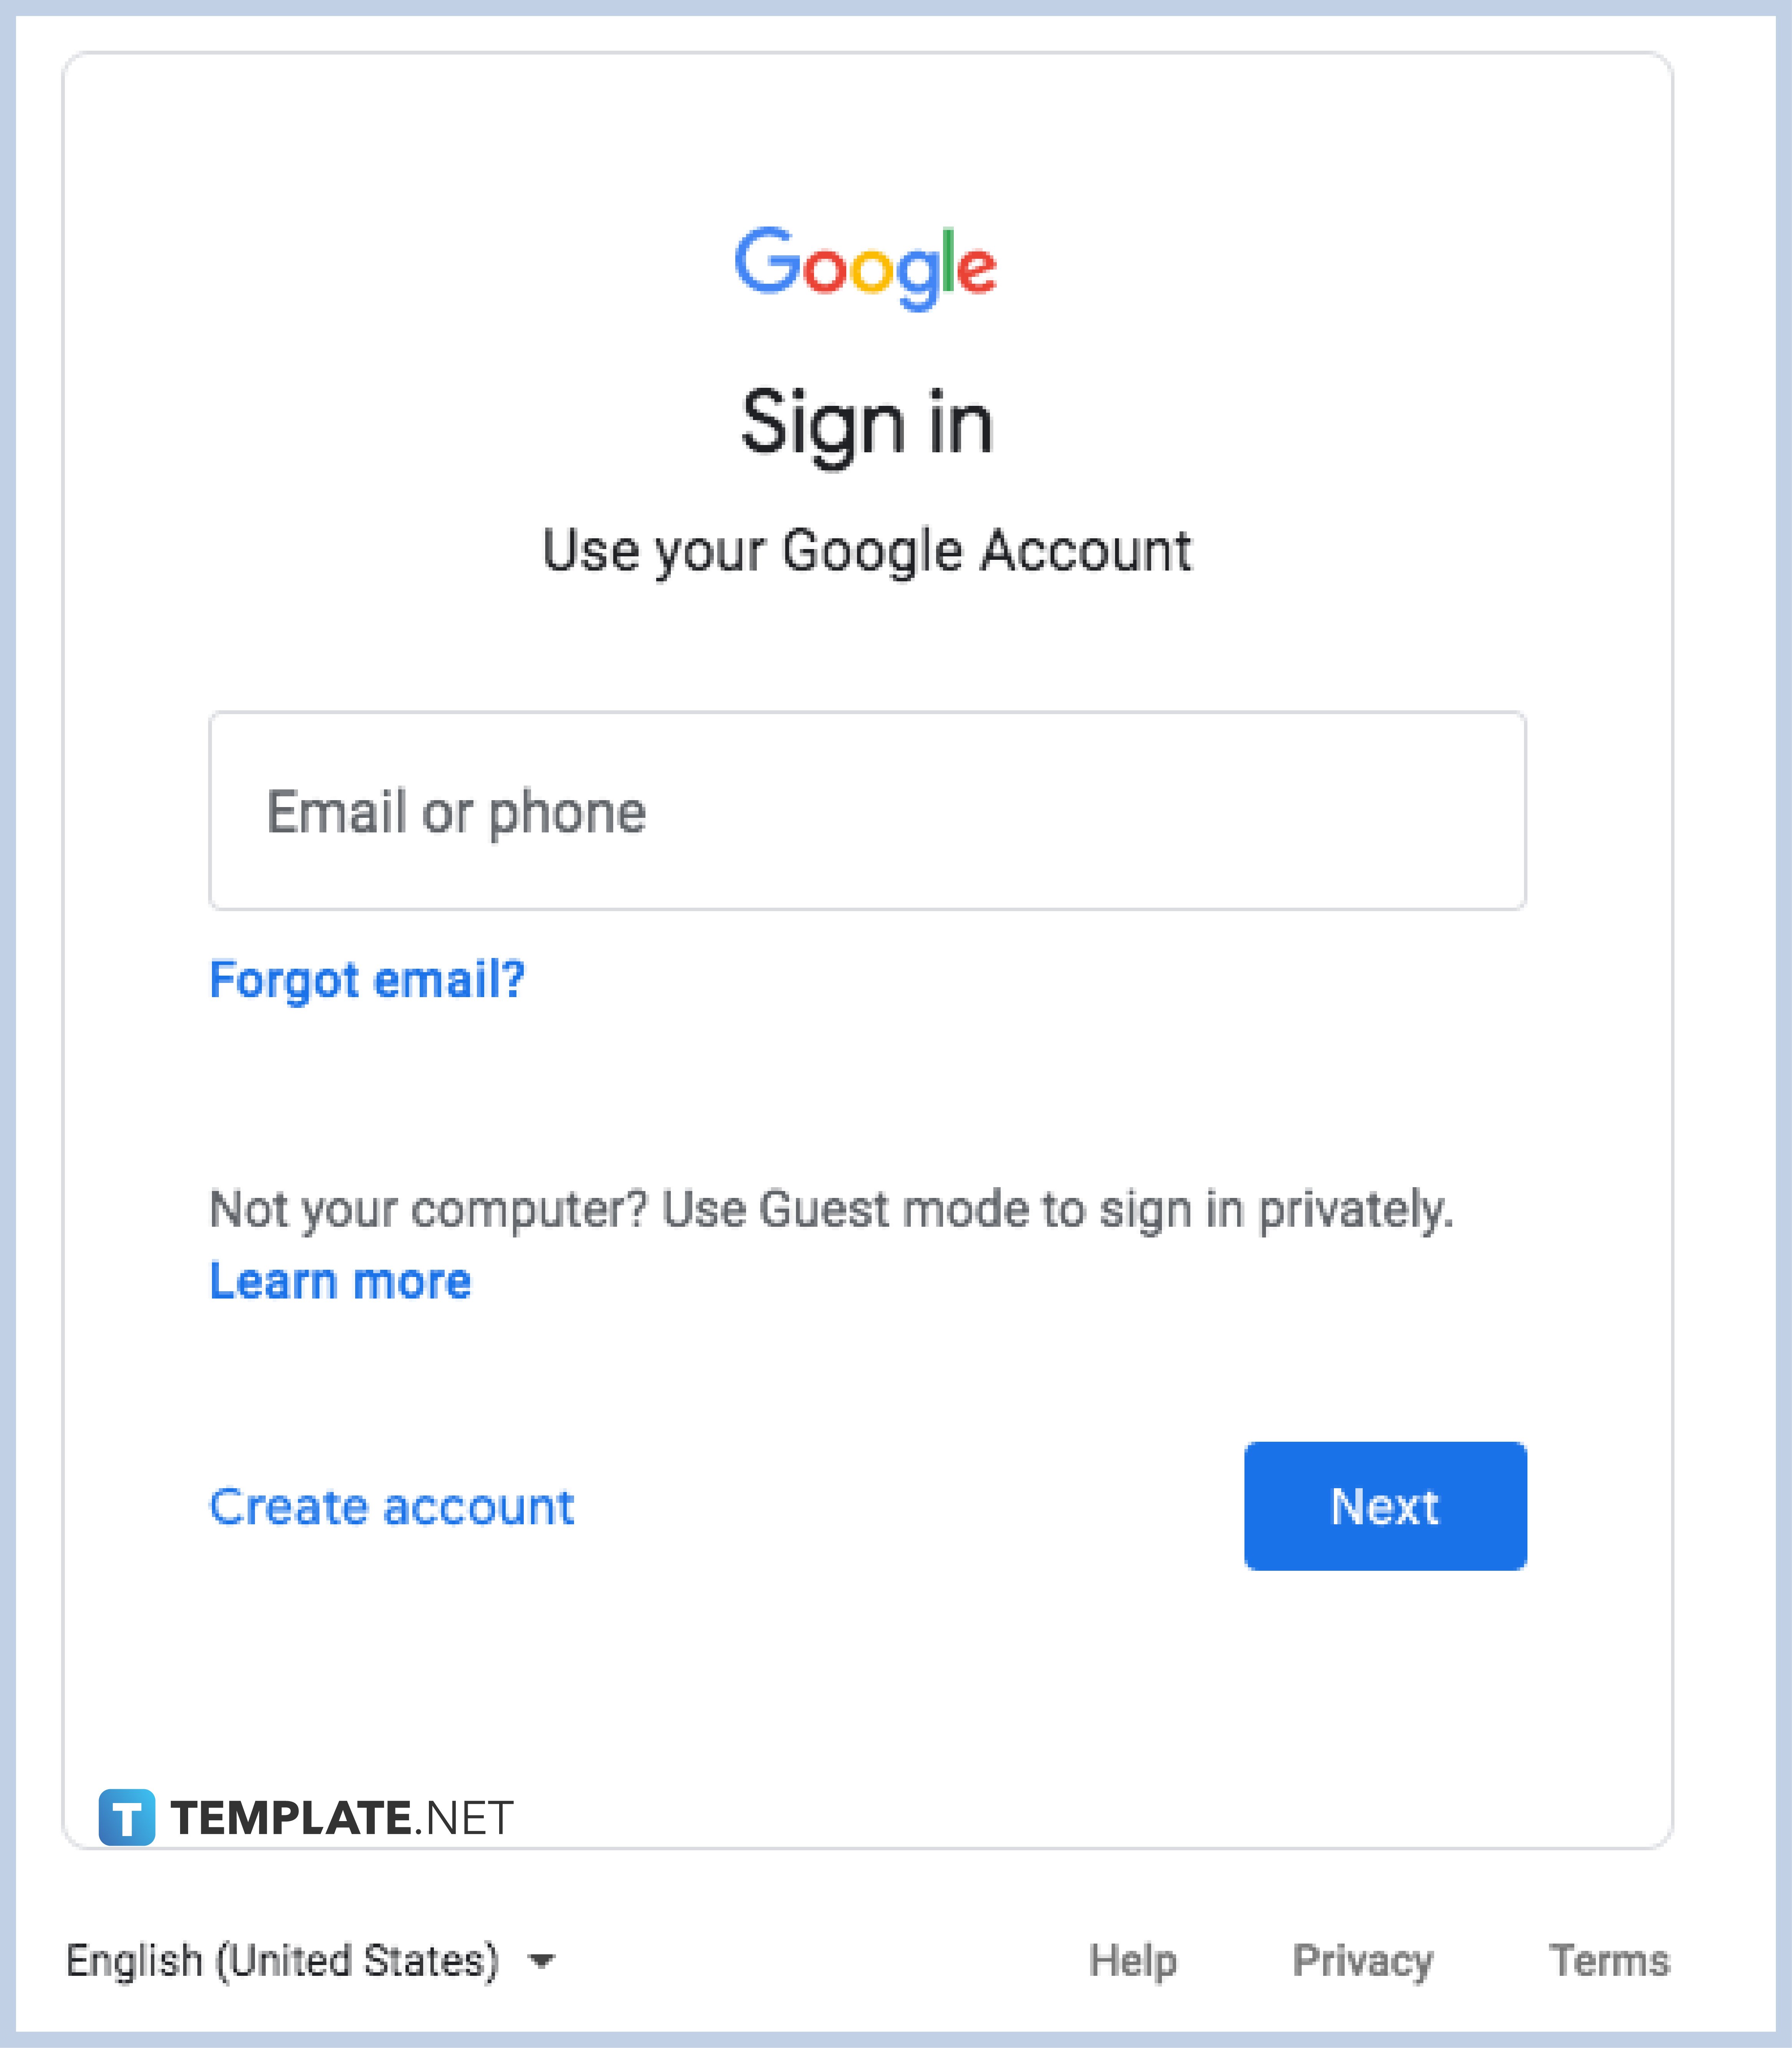 step-2-sign-in-to-your-account-01